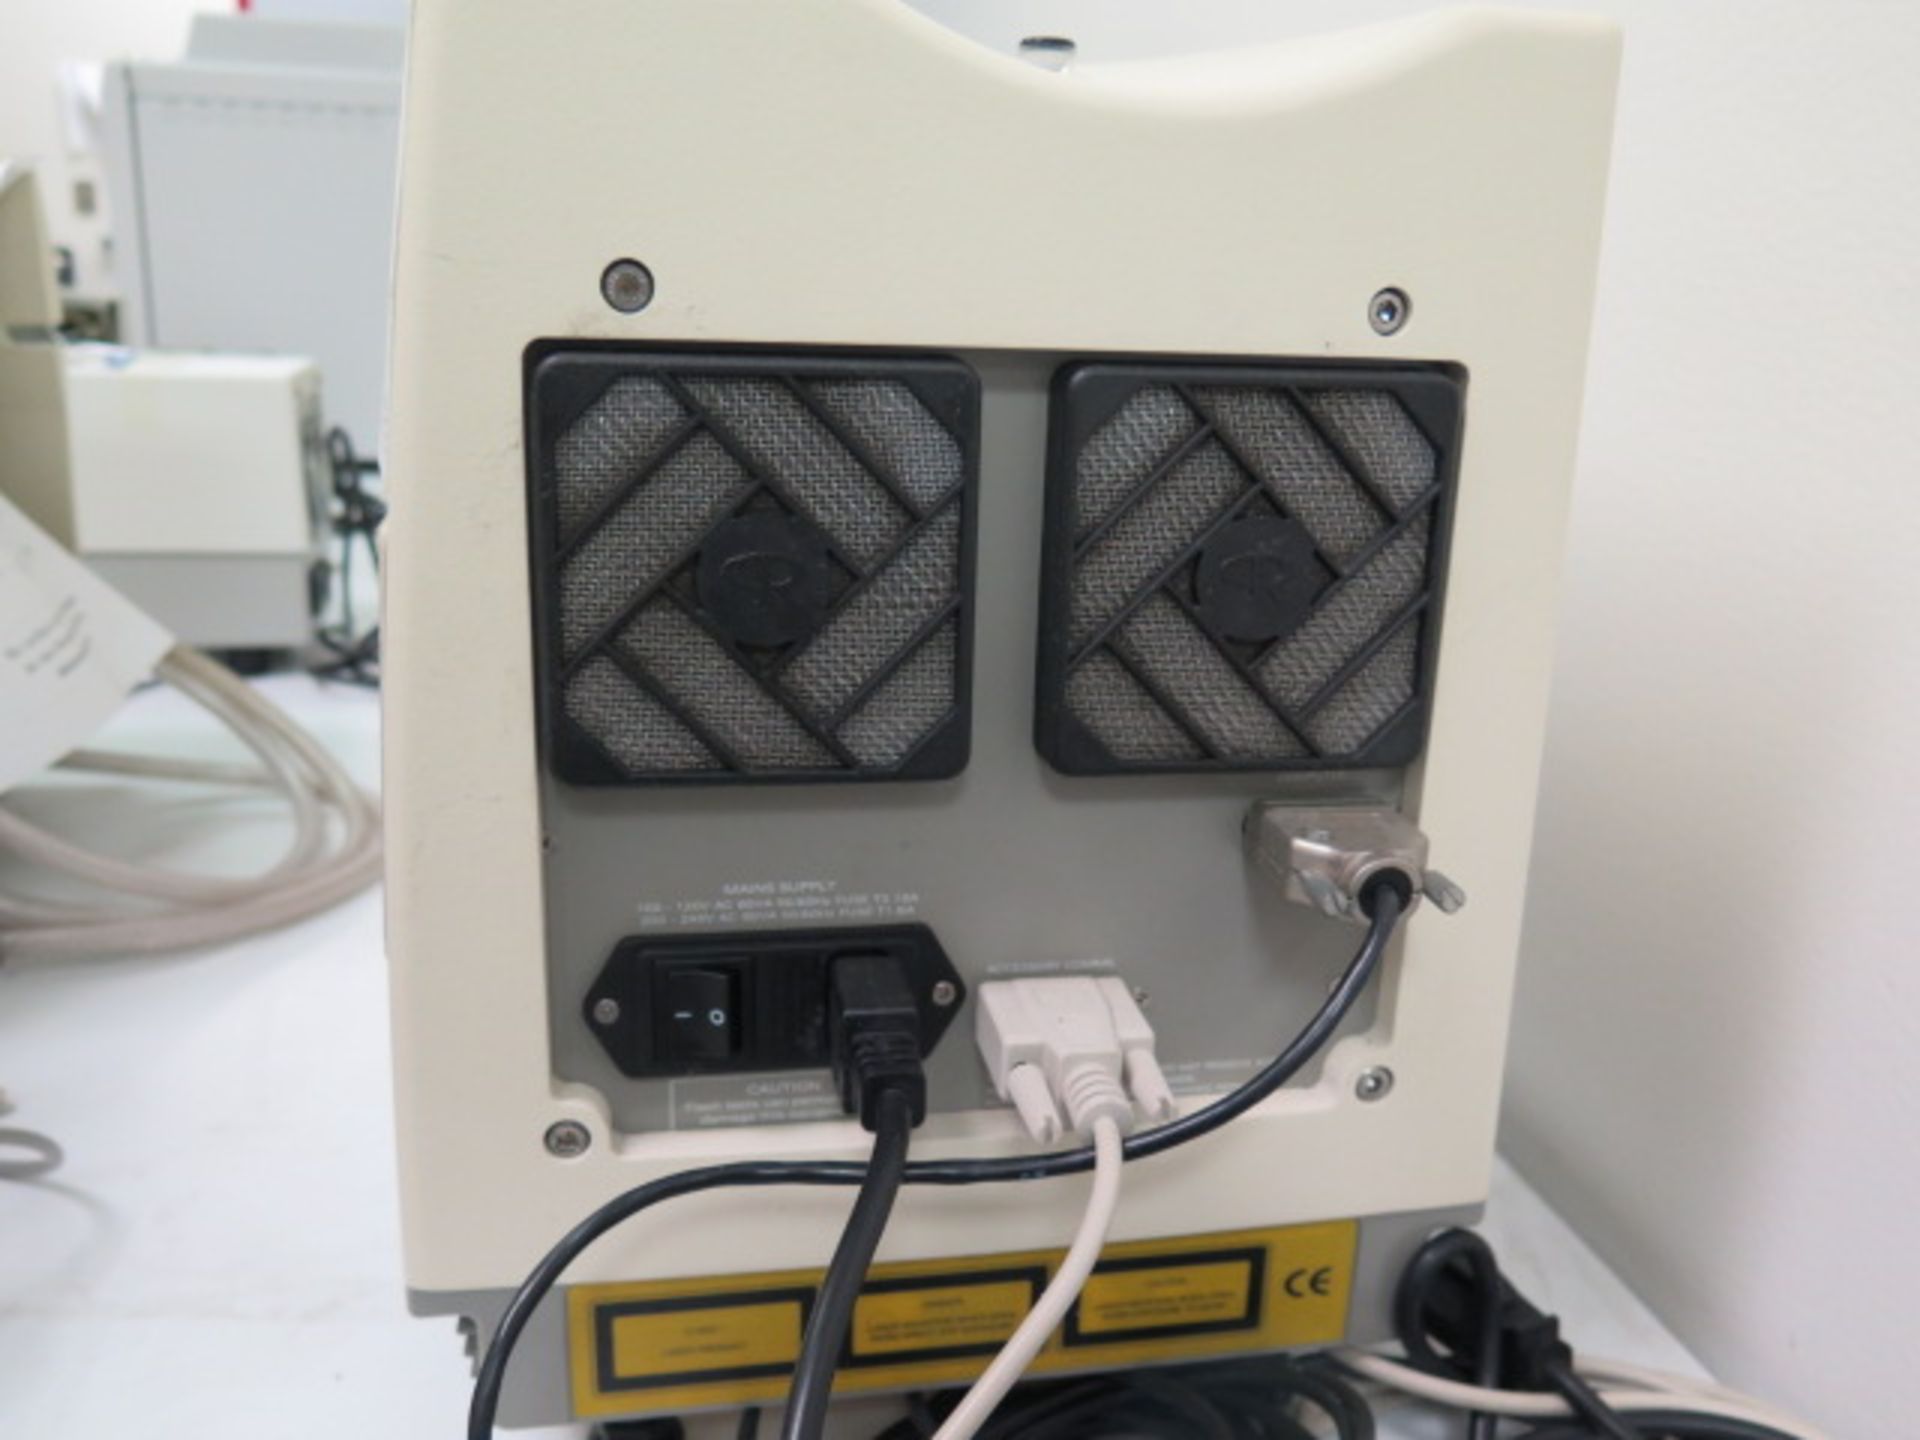 Malvern Instruments Hydro 2000S” Wet Sample Dispersion Unit (SOLD AS-IS - NO WARRANTY) - Image 5 of 21